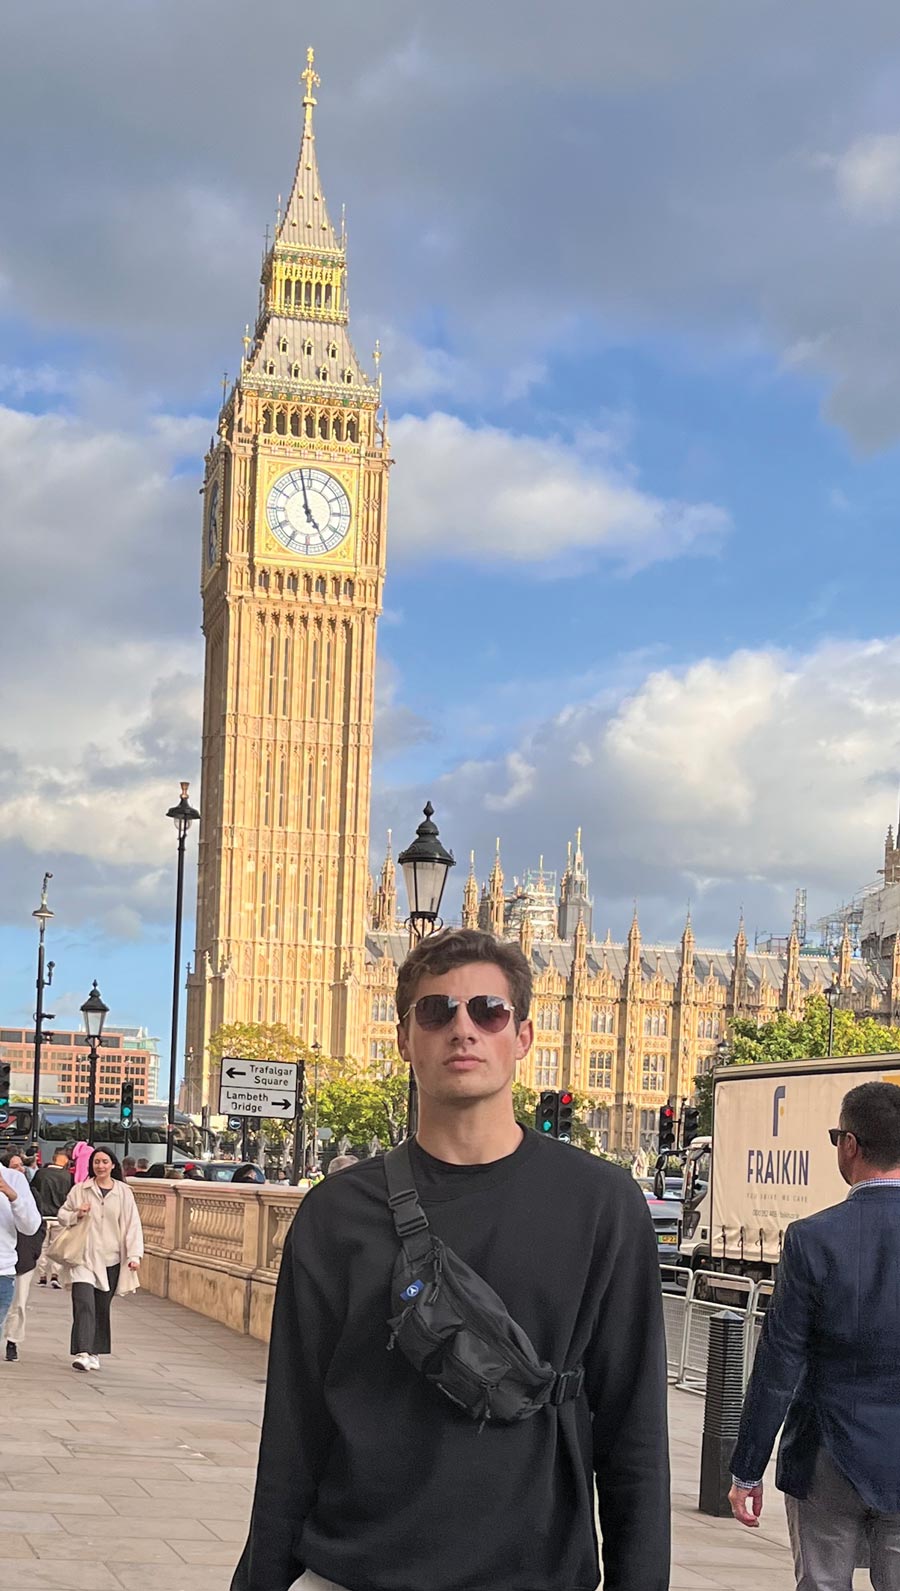 Clint Johnson in front of Big Ben, a clock tower, in London